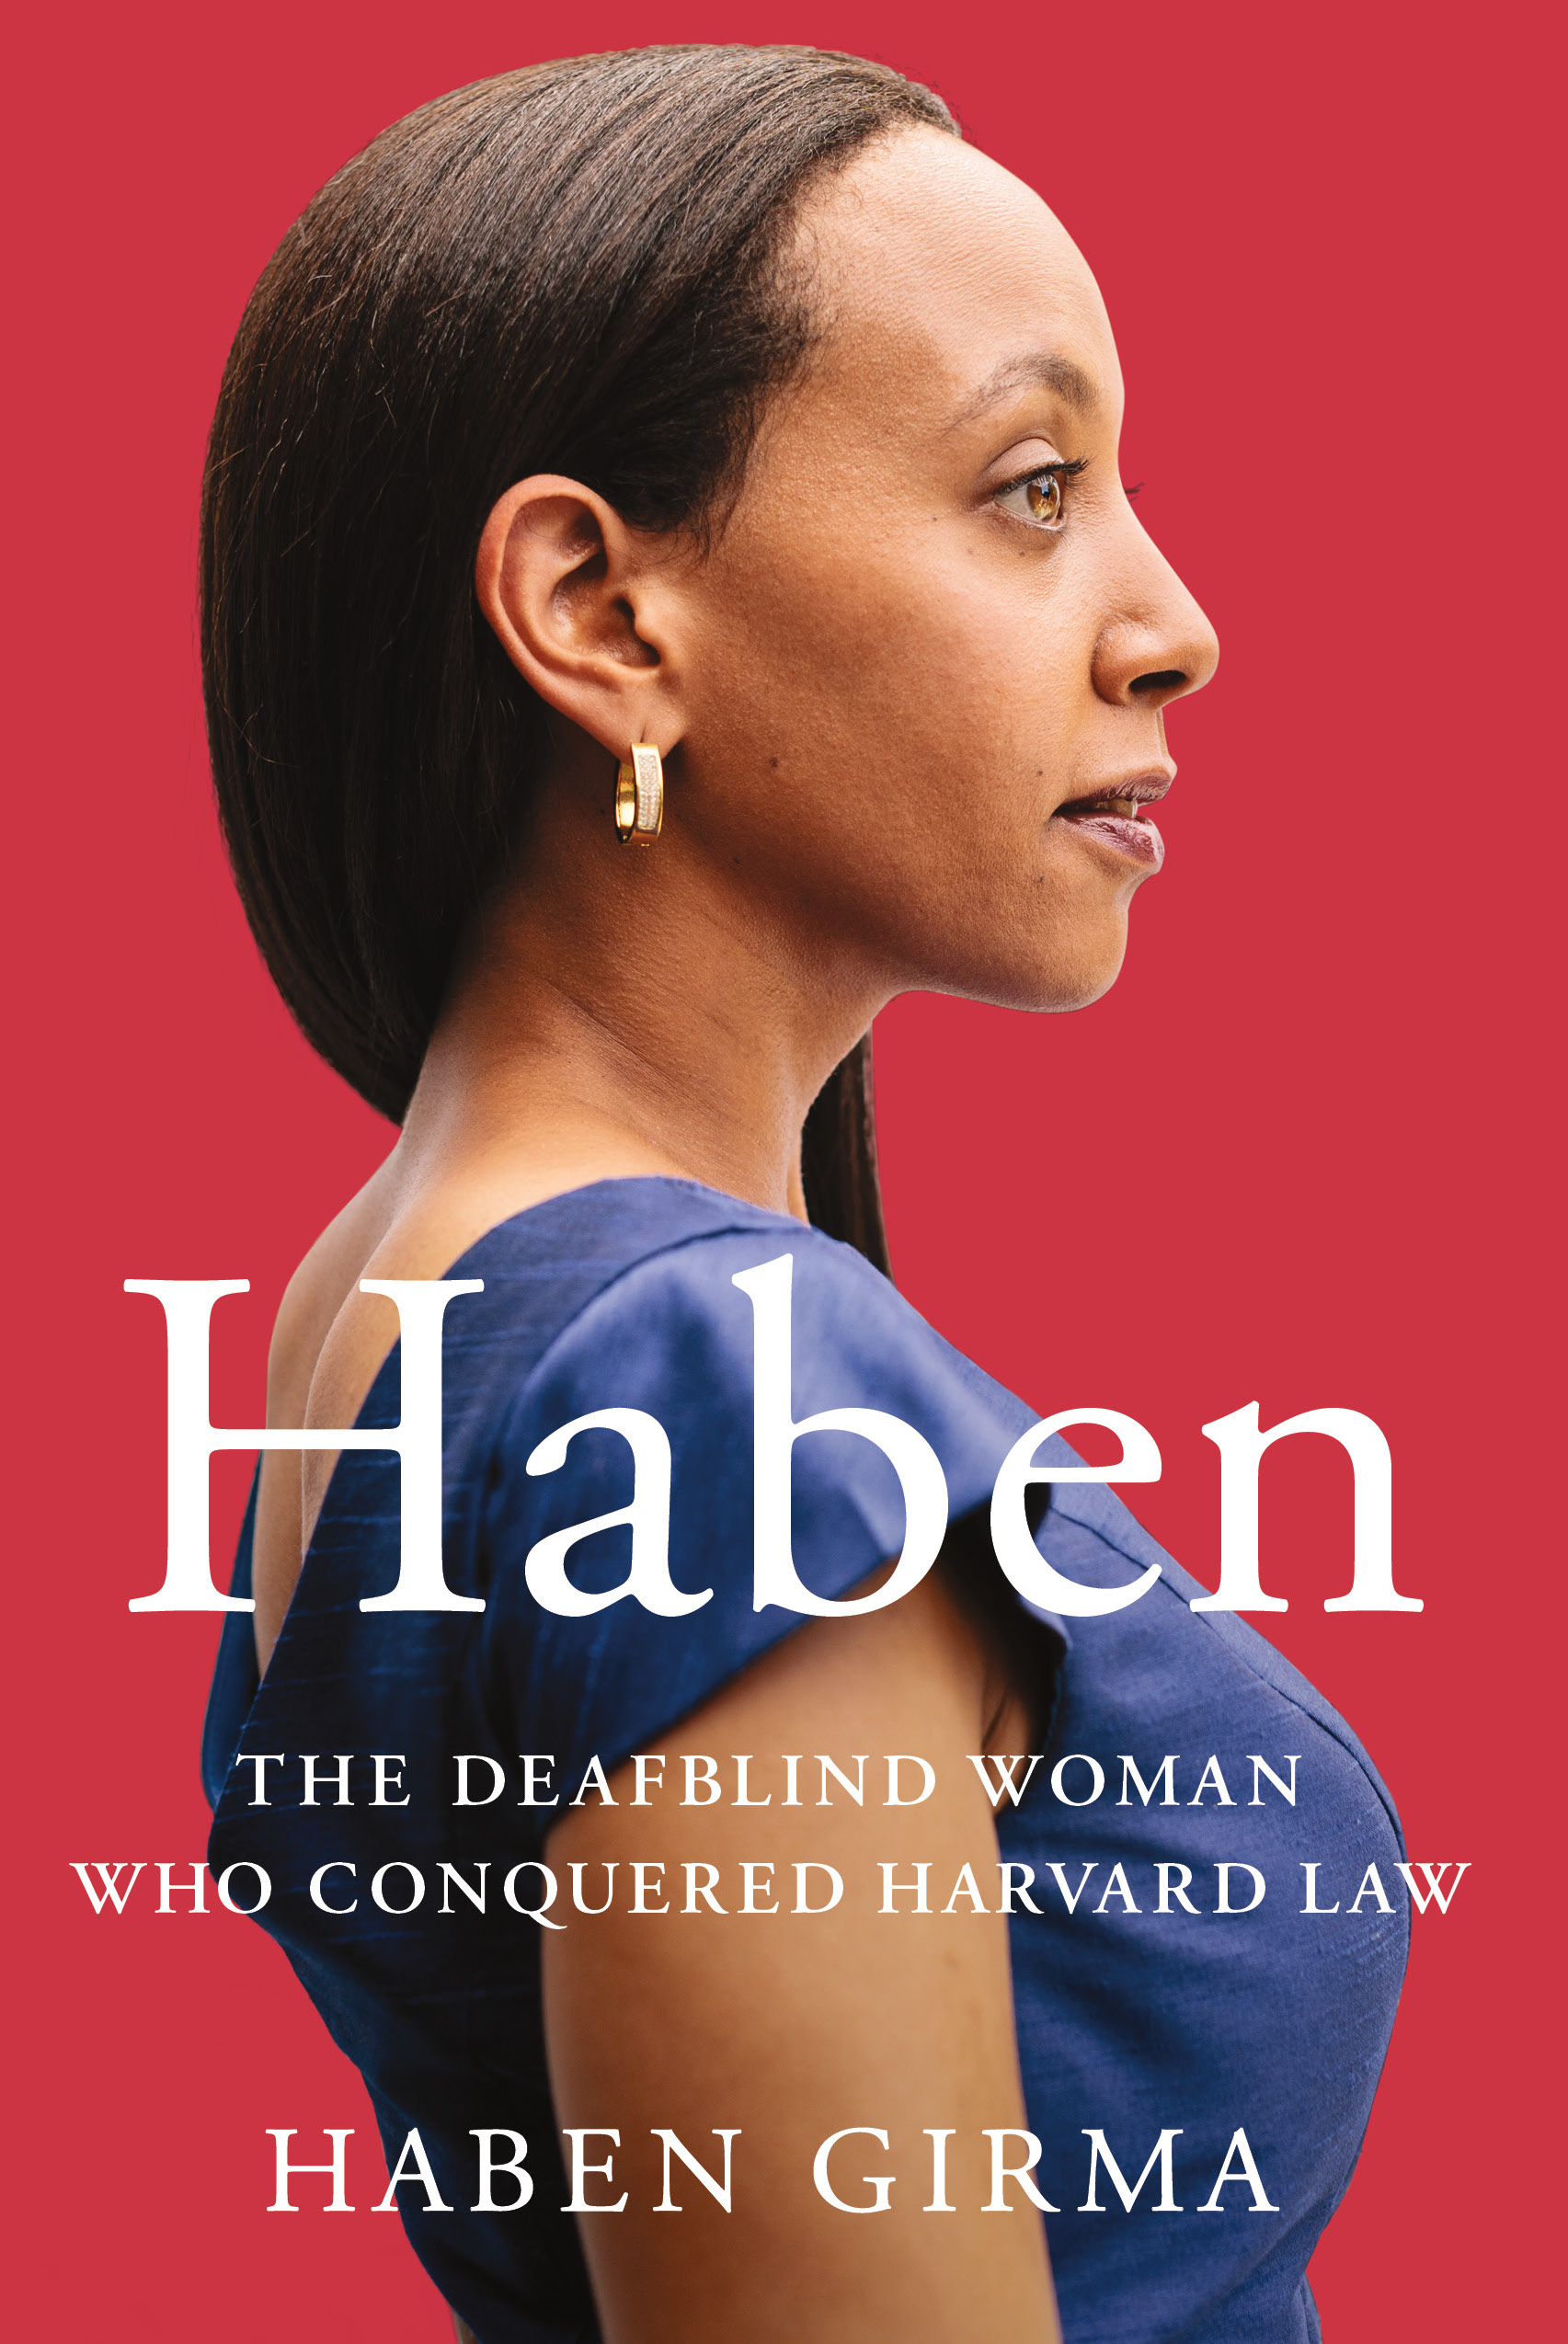 Book Cover, bright red with a portrait of a slim dark haired woman, titled Haben: The Deafblind Woman Who Conquered Harvard Law  